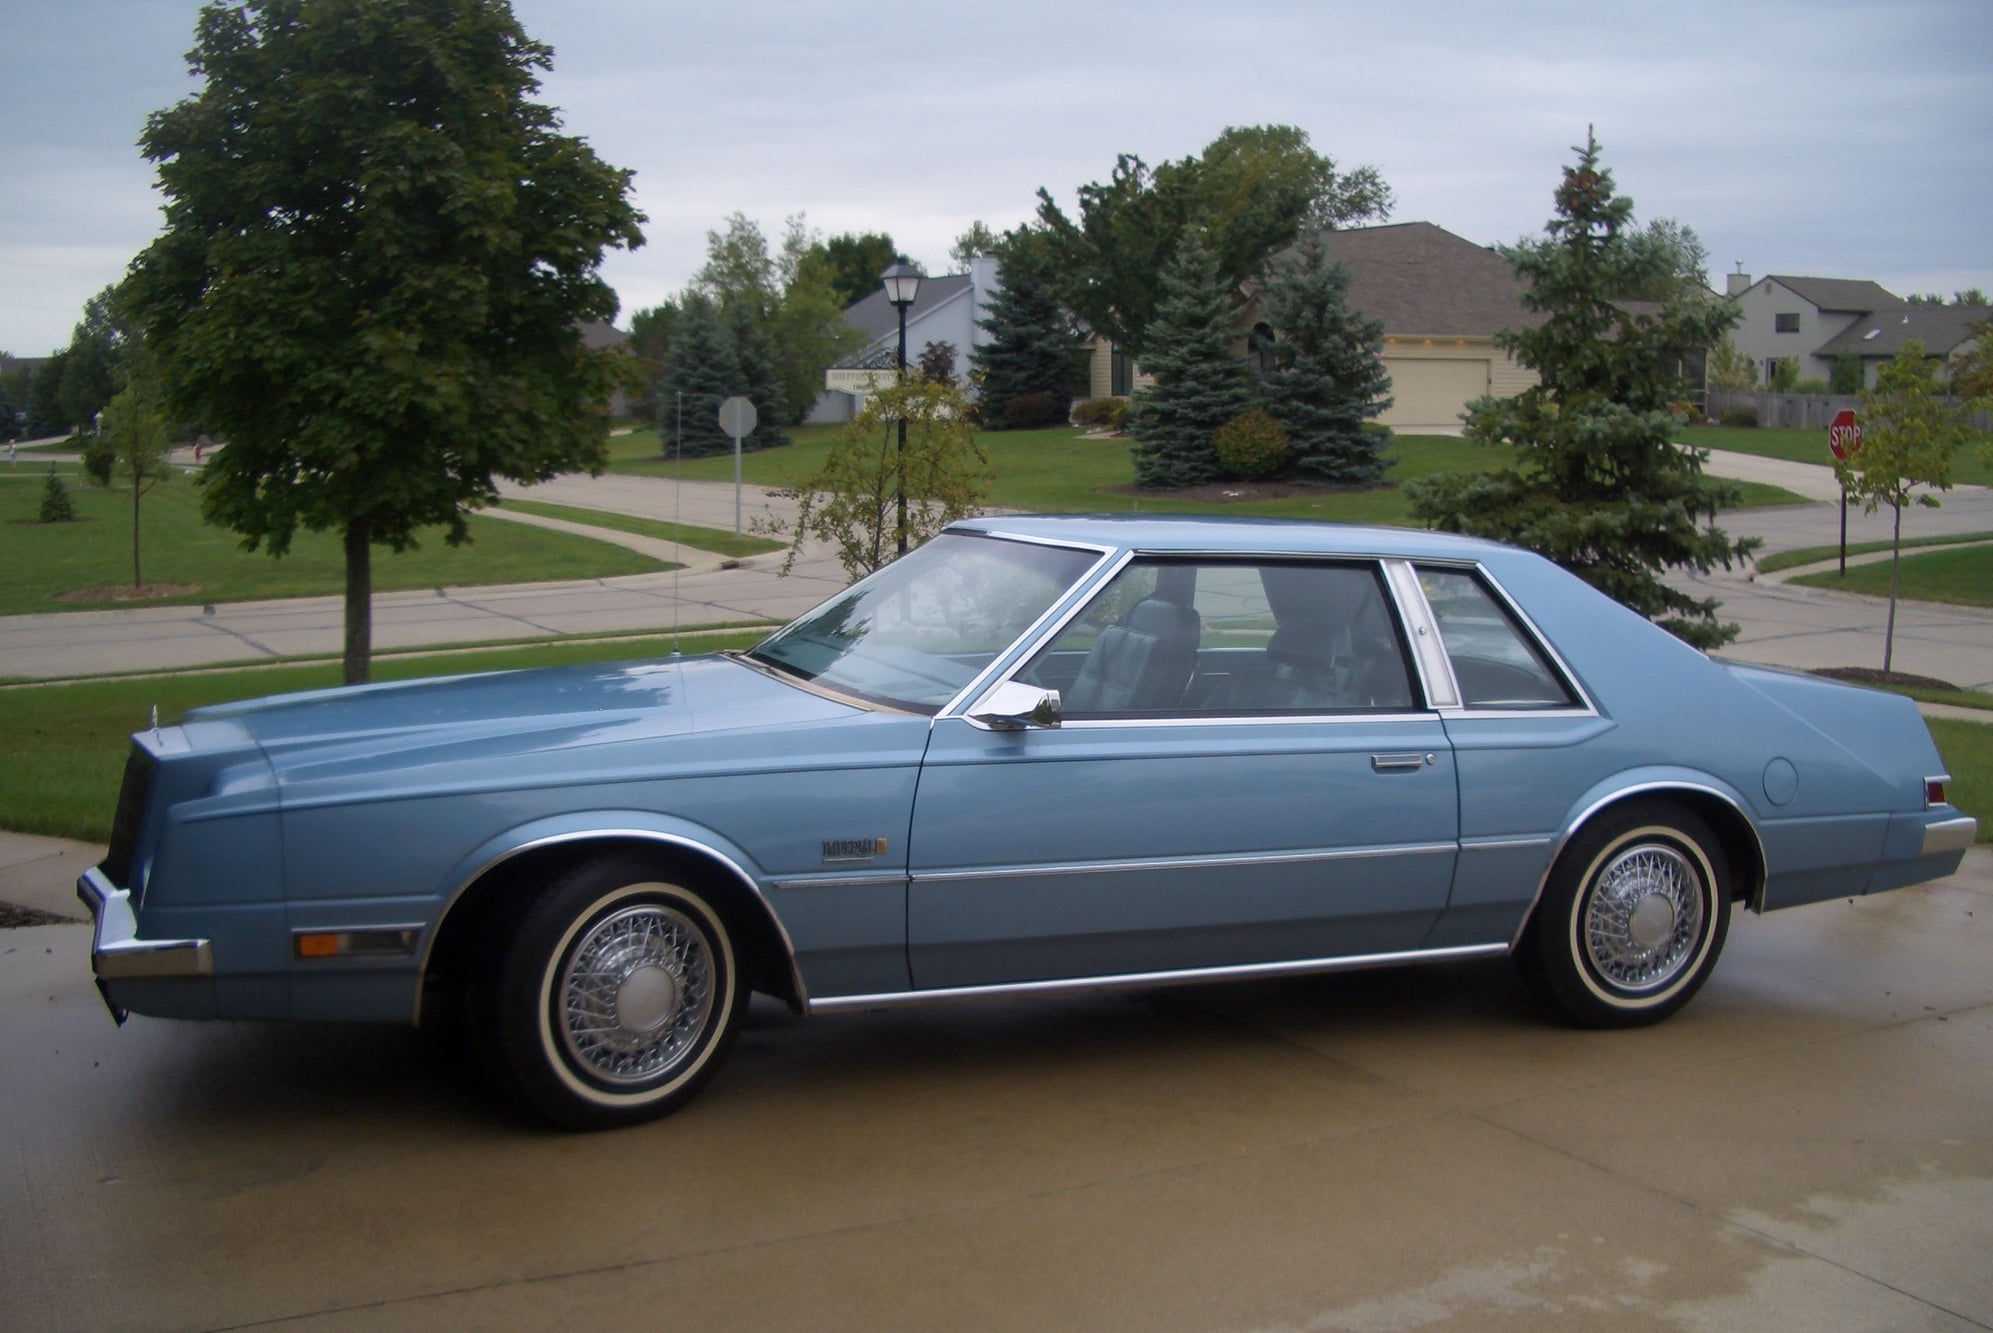 1982 Chrysler Imperial - 1982 Frank Sinatra Edition Imperial - Used - VIN 2A3By62J3CR153247 - 8 cyl - 2WD - Automatic - Blue - Fort Wayne, IN 46804, United States